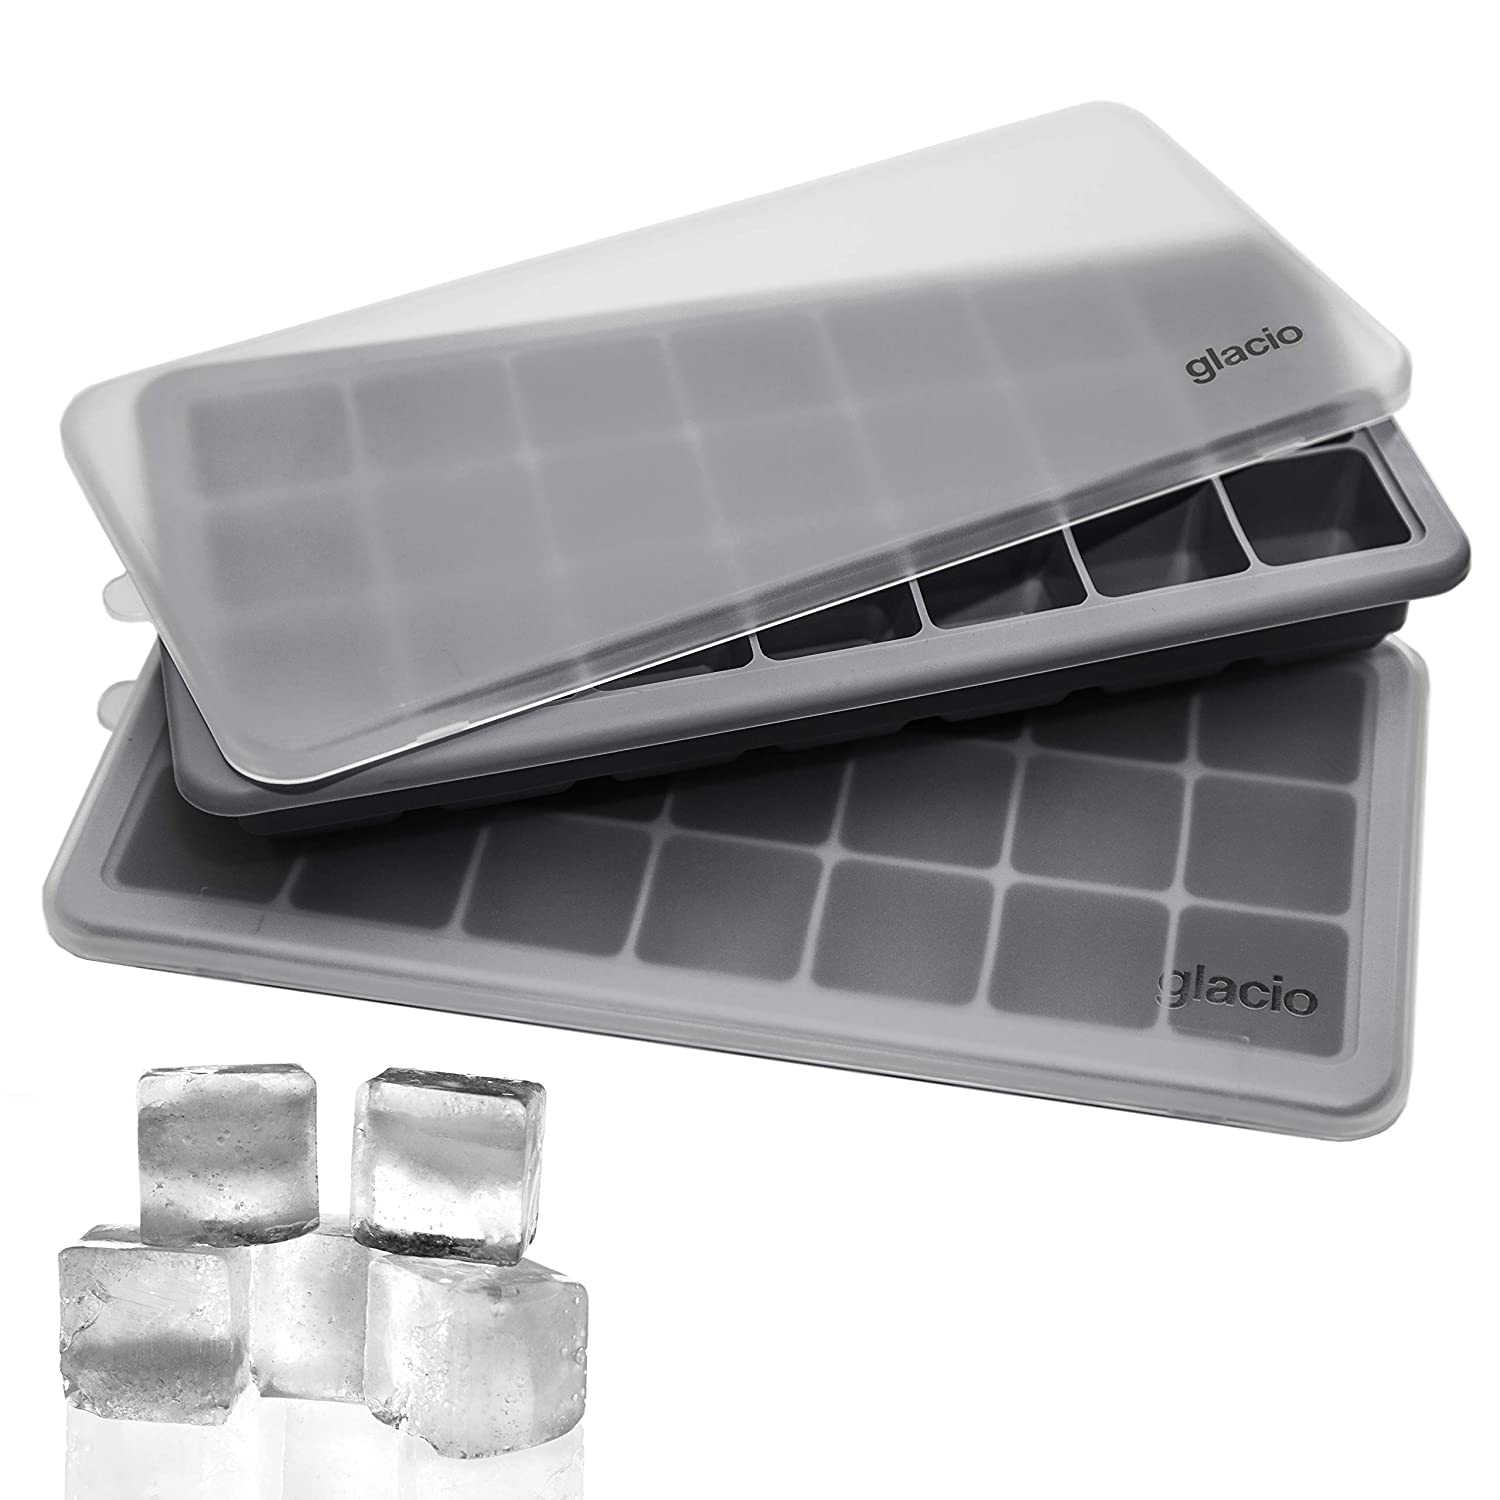 glacio Silicone Ice Cube Trays With Lids, 2-Pack